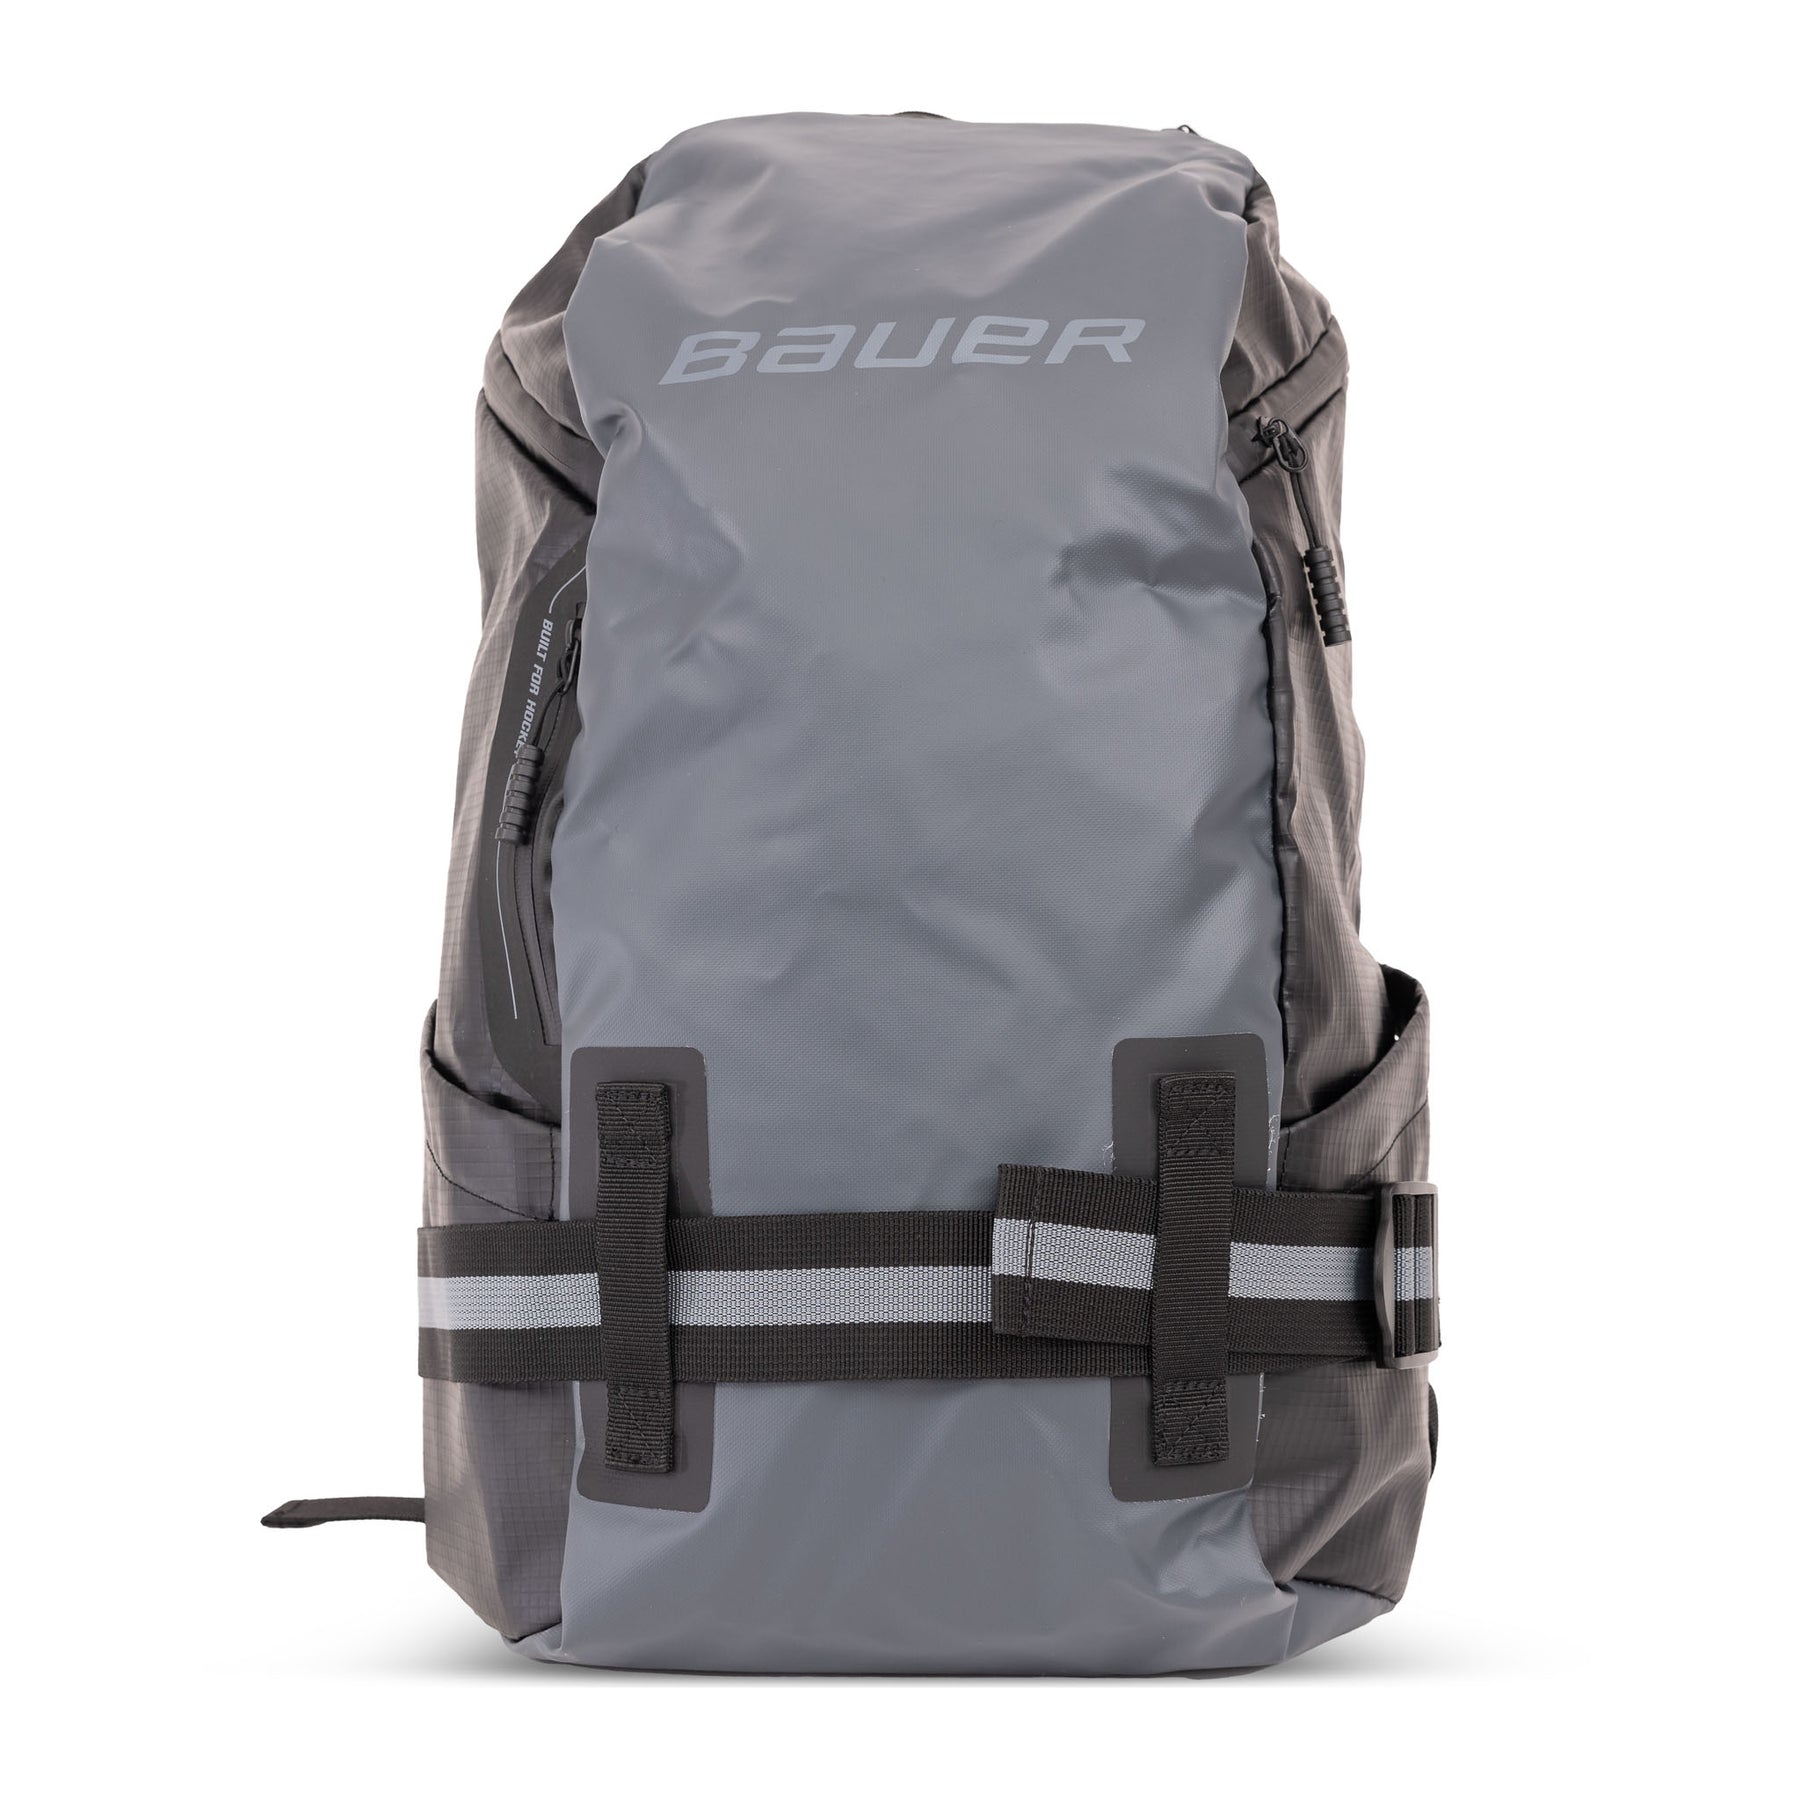 Bauer Batoh Bauer Tactical Backpack S22